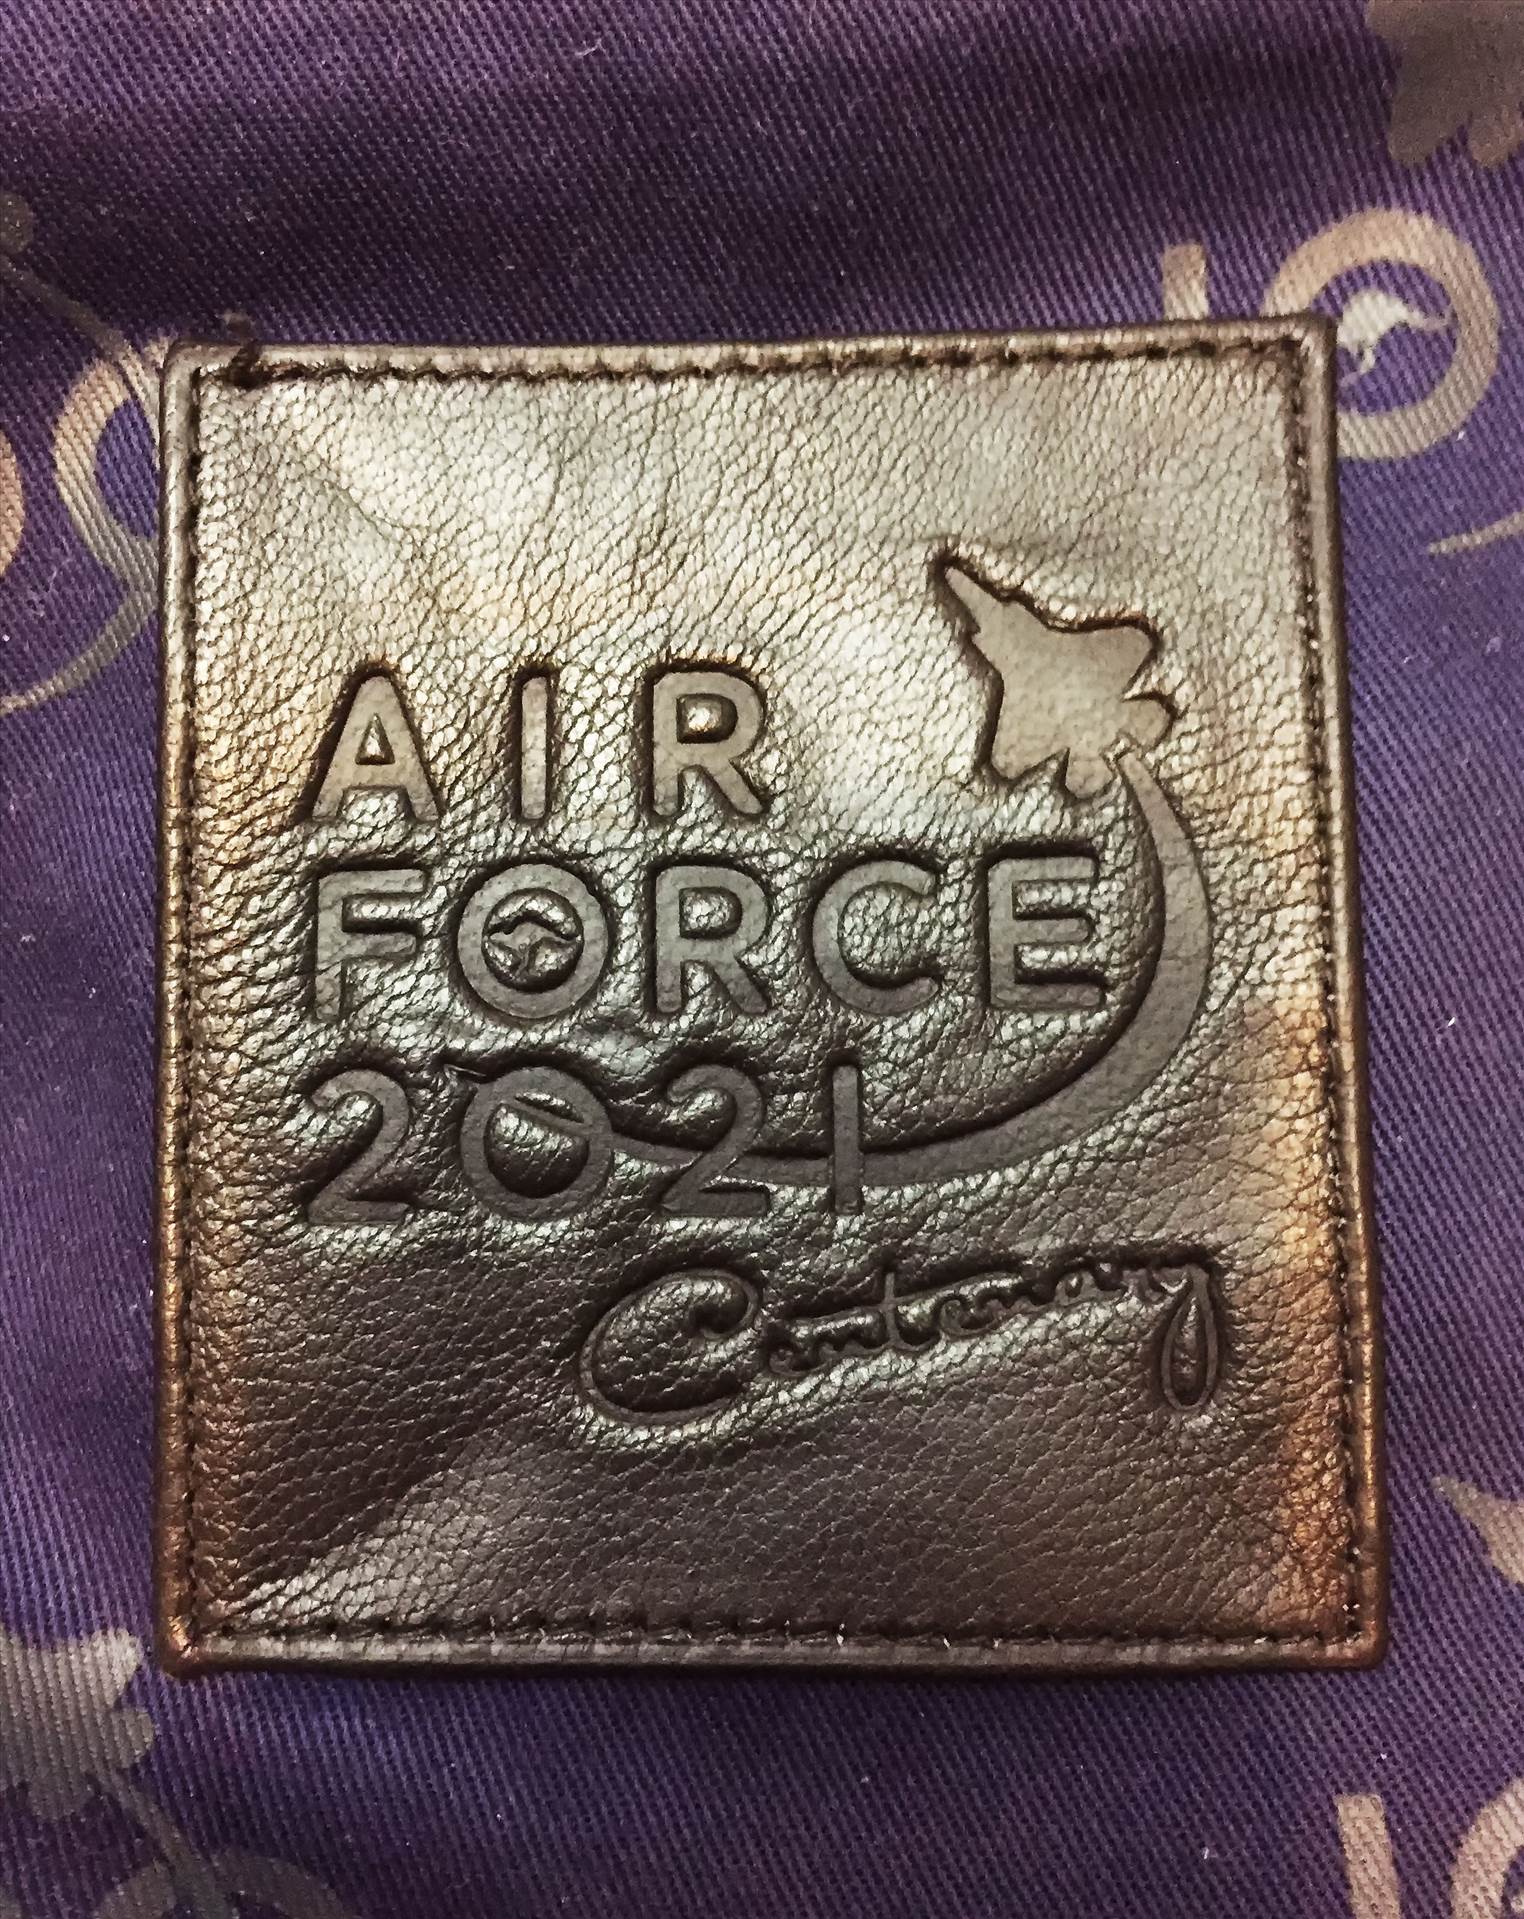 AIR FORCE A2 Leather Flight Jacket Patch AIR FORCE A2 Leather Flight Jacket Special Centenary Edition by johntorcasio